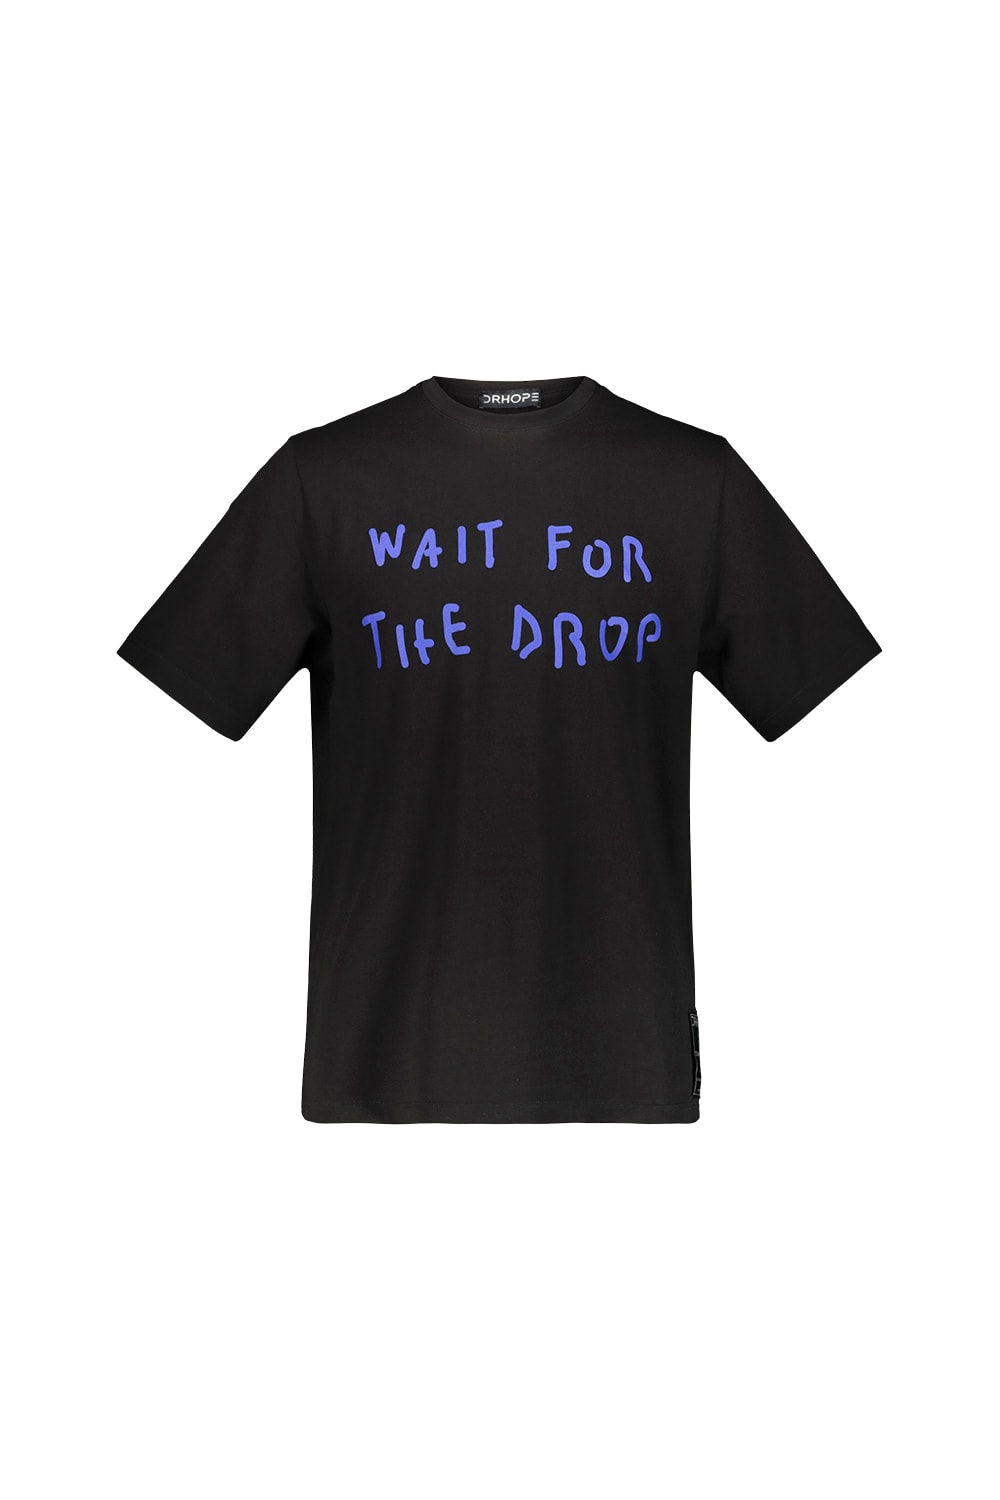 DRHOPE T-SHIRT WITH WAIT FOR THE DROP BLUE PRINT